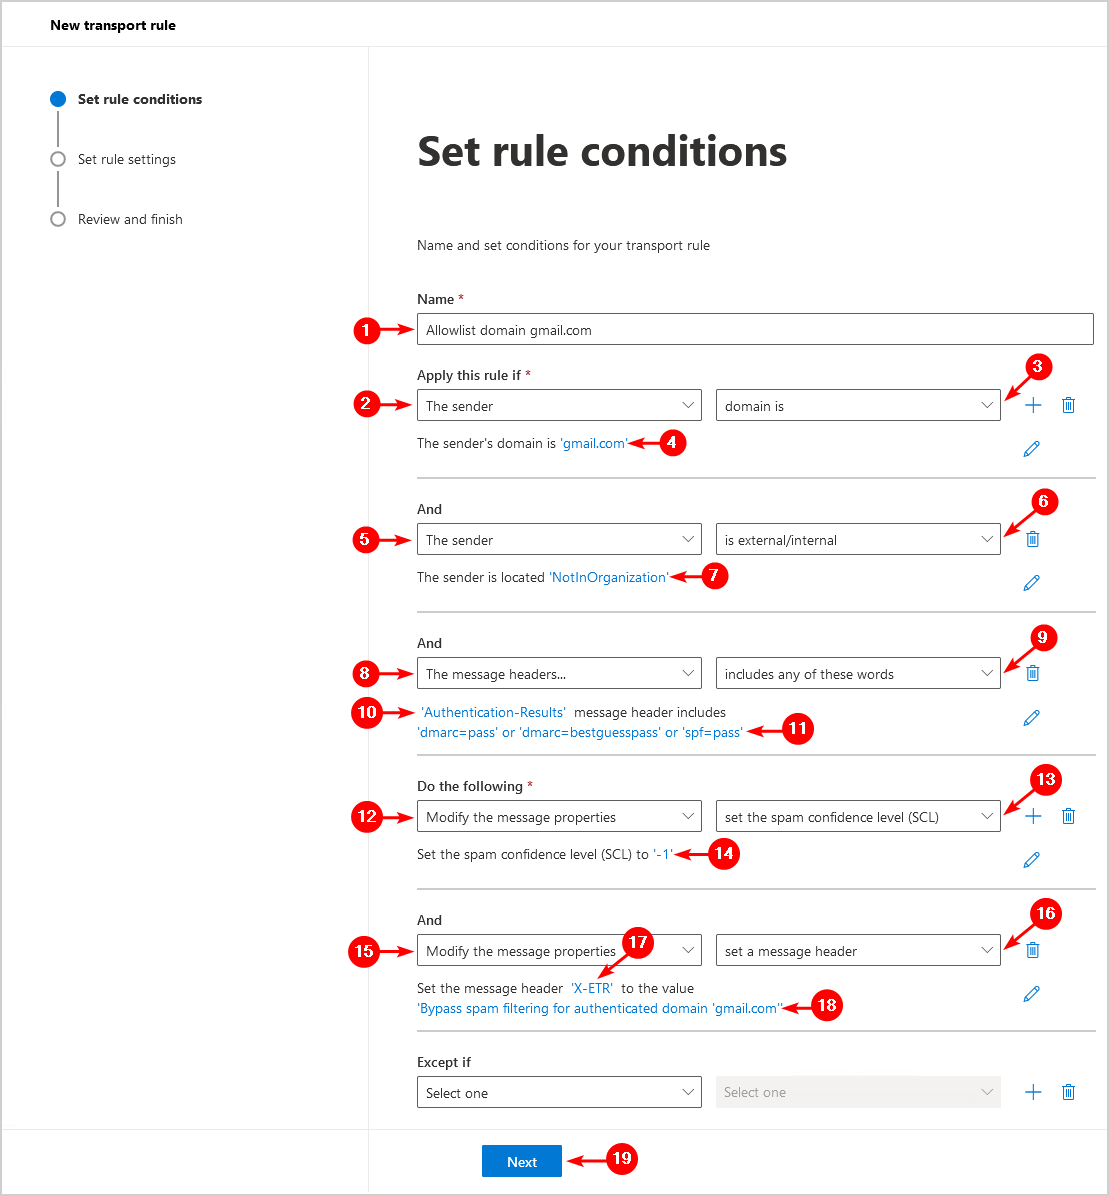 How to Allowlist domain in Microsoft 365 set rule conditions